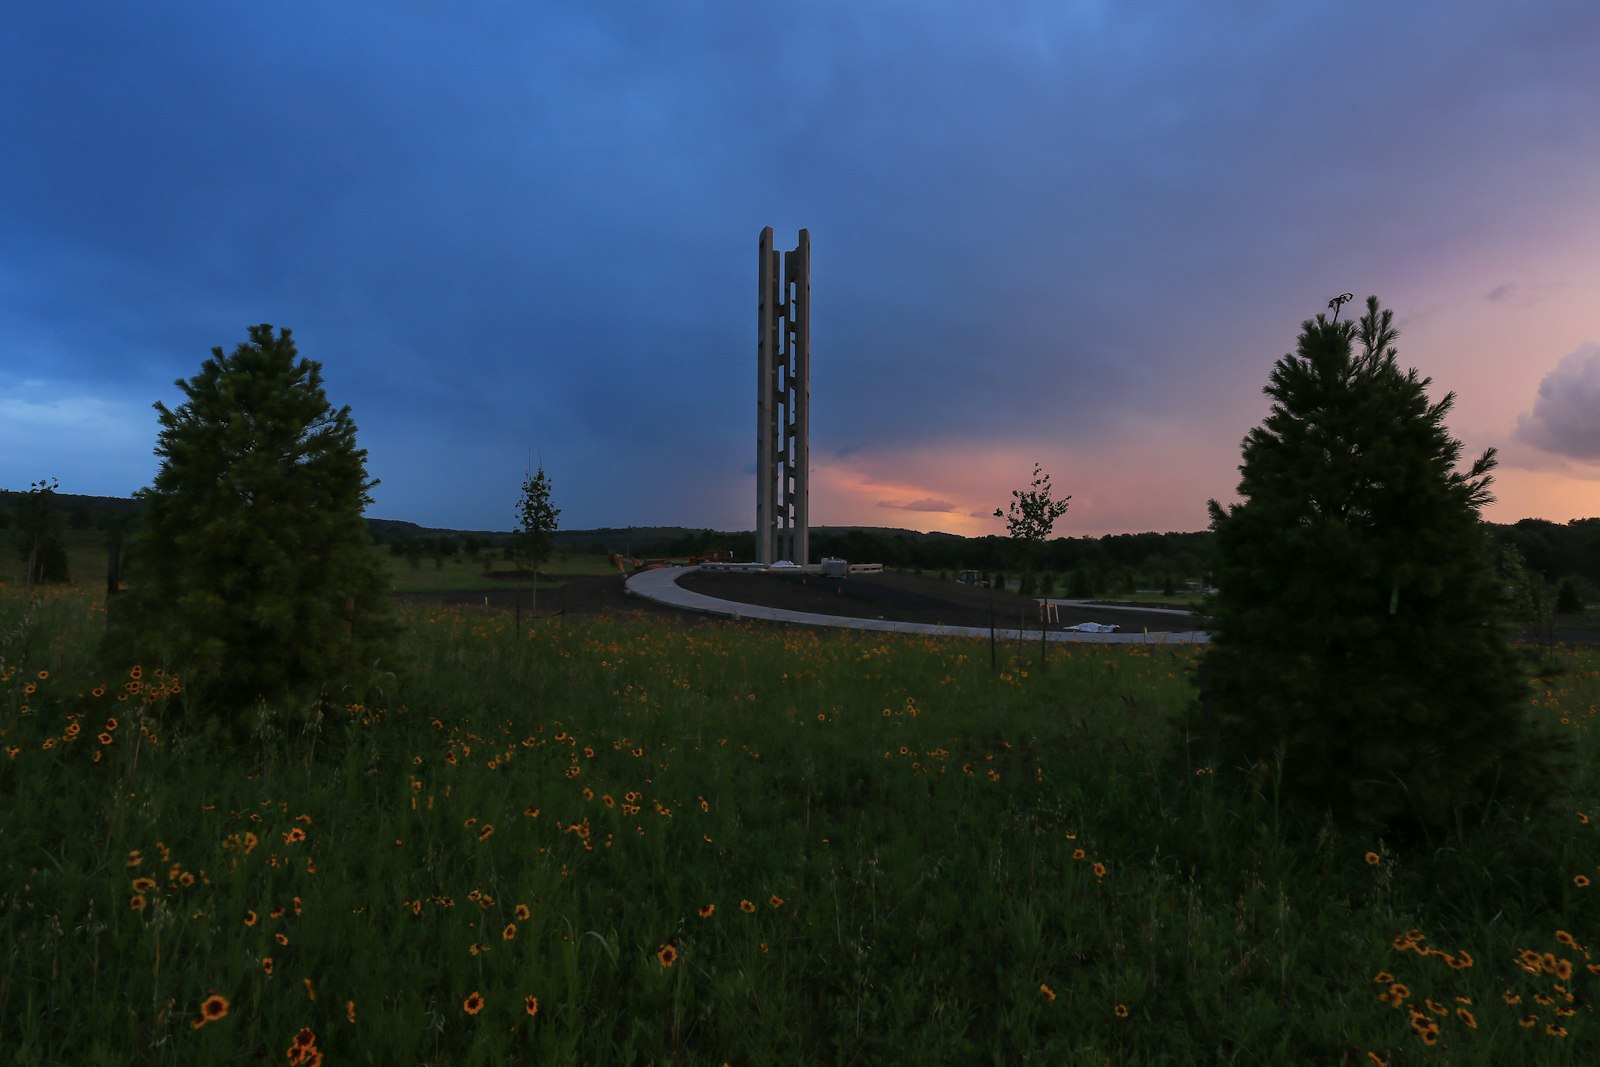 At sunset, a winding path that leads to an open tower structure